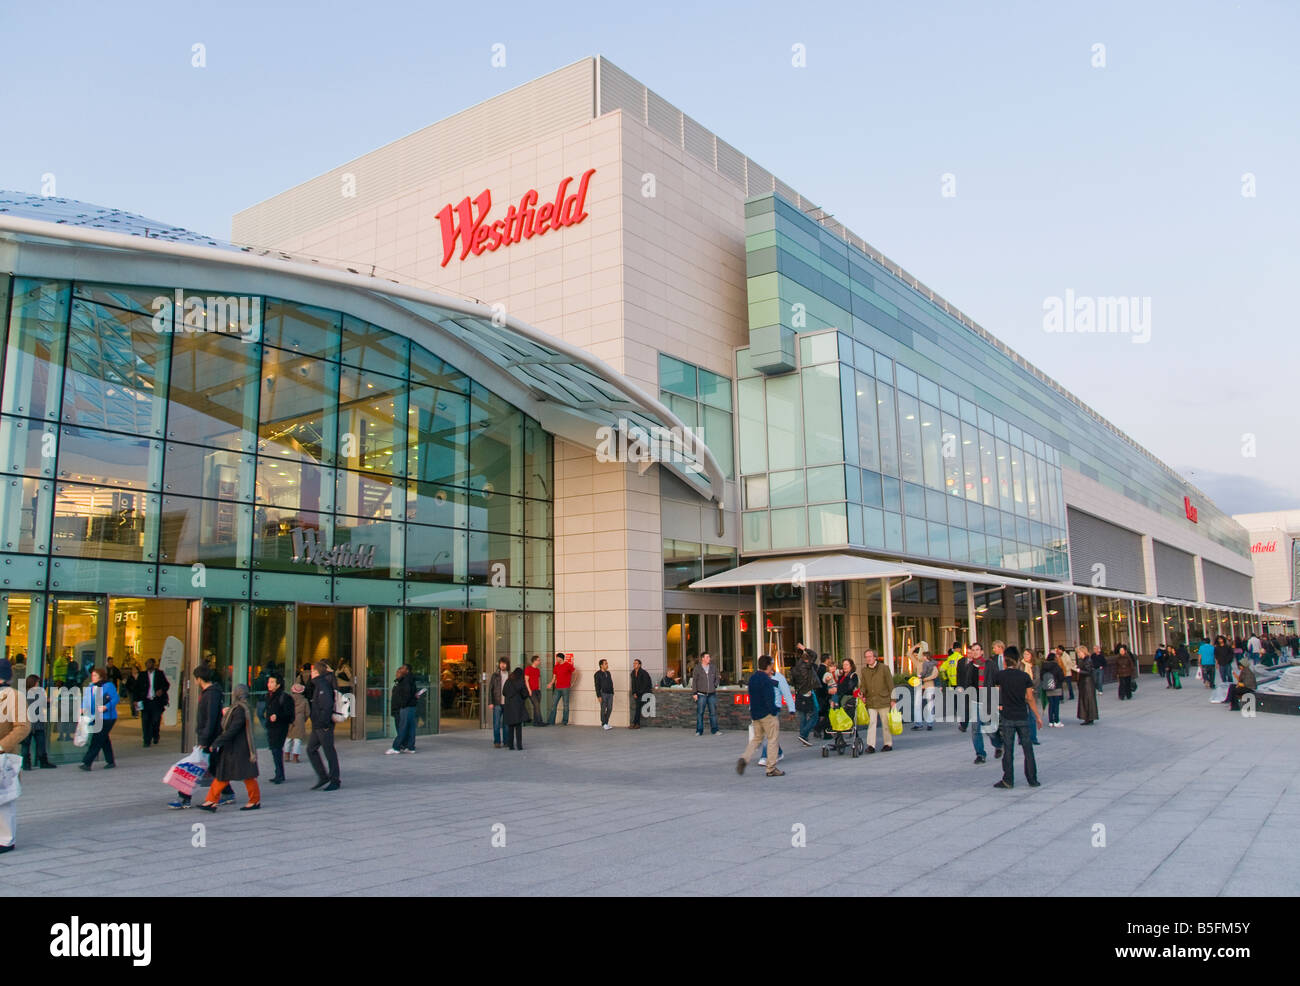 File:London - Westfield Shopping Centre - View East.jpg